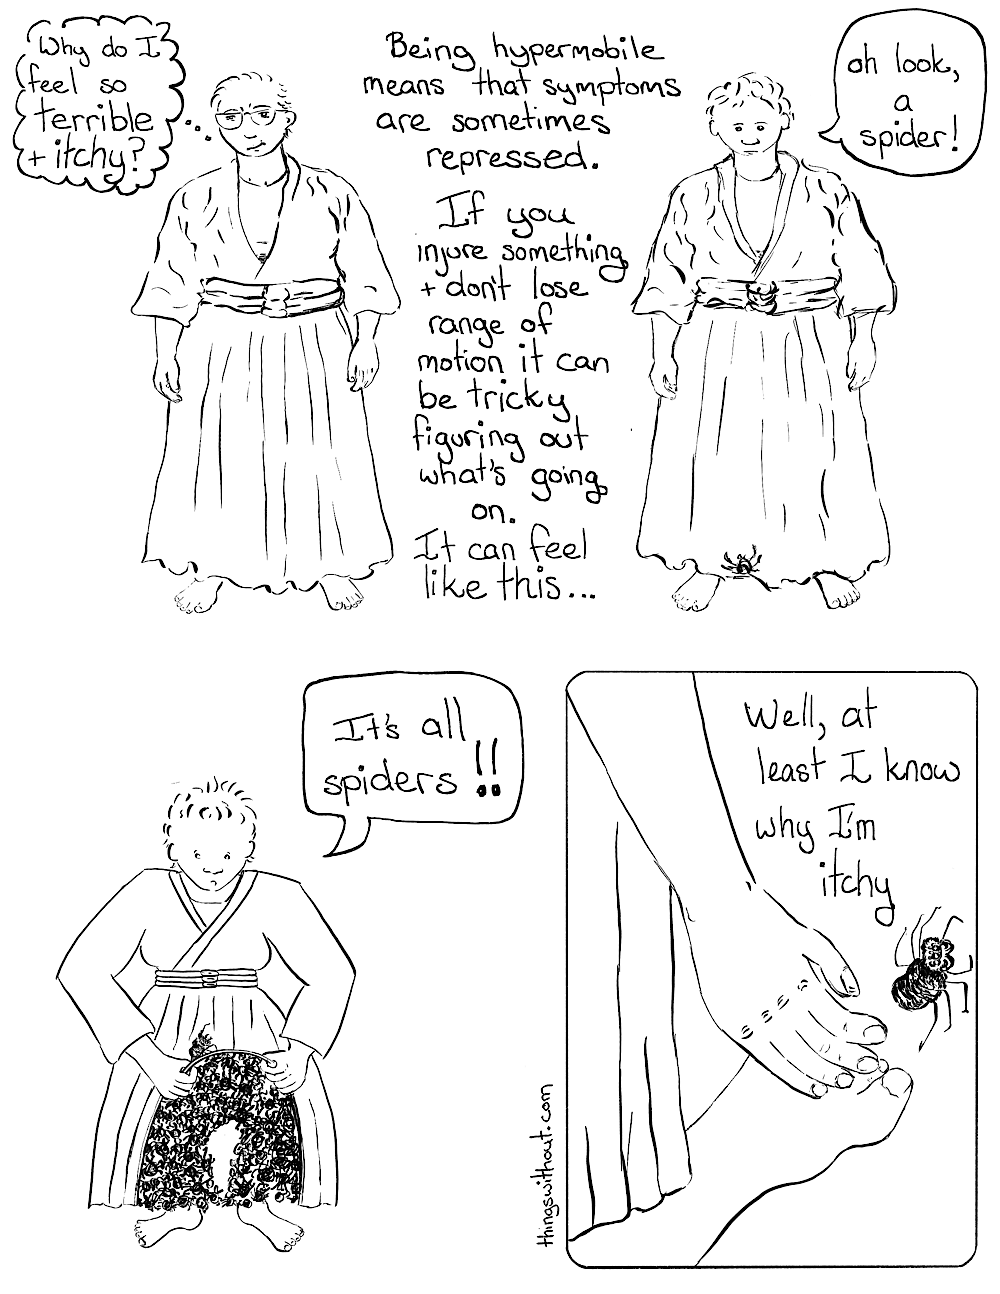 Transcript: Liz is wearing her Aikido gi and hakama (Japanese formal wear that looks like an awesome pleated skirt). Liz: Why do I feel so terrible and itchy? Caption: Being hypermobile means that symptoms are sometimes repressed. If you injure something and don’t lose range of motion it can be tricky figuring out what’s going on. It can feel like this... A small spider crawls up onto Liz’s hakama. Liz: Oh look, a spider! Liz pulls up her hakama to reveal two legs entirely covered in spiders. Liz: It’s all spiders!! Liz‘s hakama is back in place. Her hand  brushes the one visible spider away from her foot. Liz: Well, at least I know why I’m itchy.